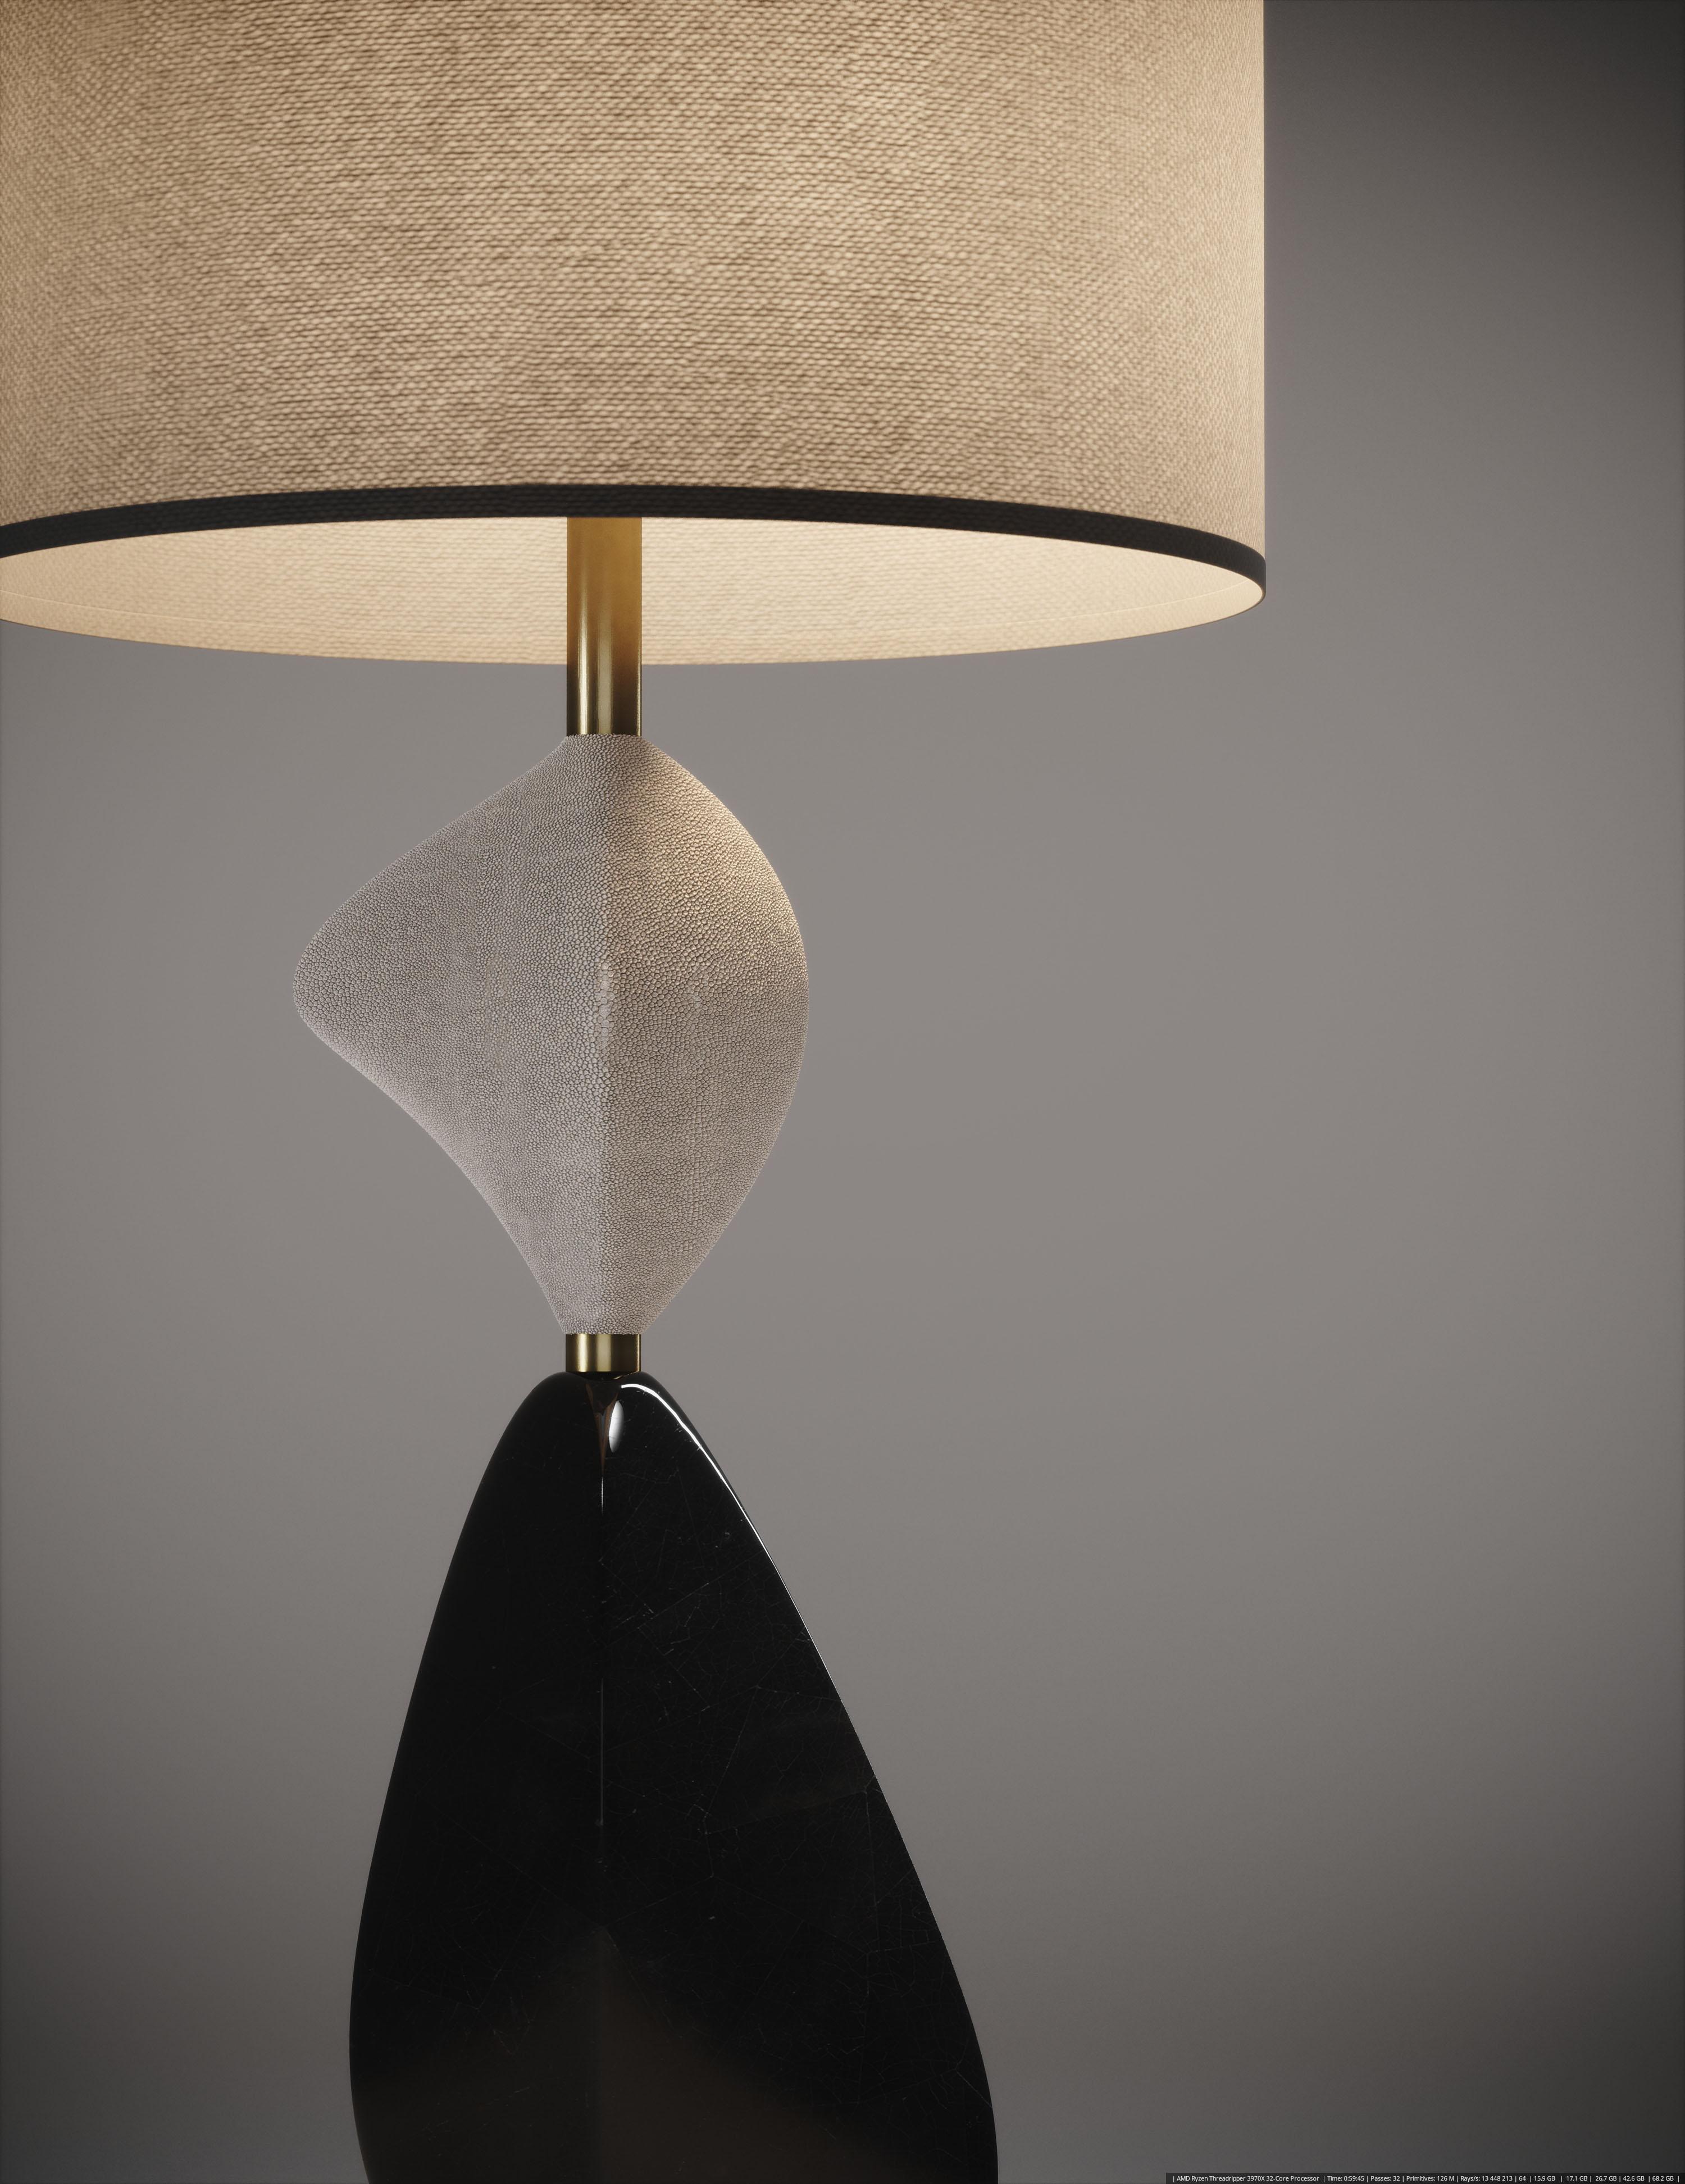 The Cosmo III table lamp by Kifu Paris is a whimsical and sculptural piece, inlaid in cream shagreen and black pen shell with bronze-patina brass accents. This piece is a sister to the original Cosmo Lamp by Kifu Paris, see images at end of slide.